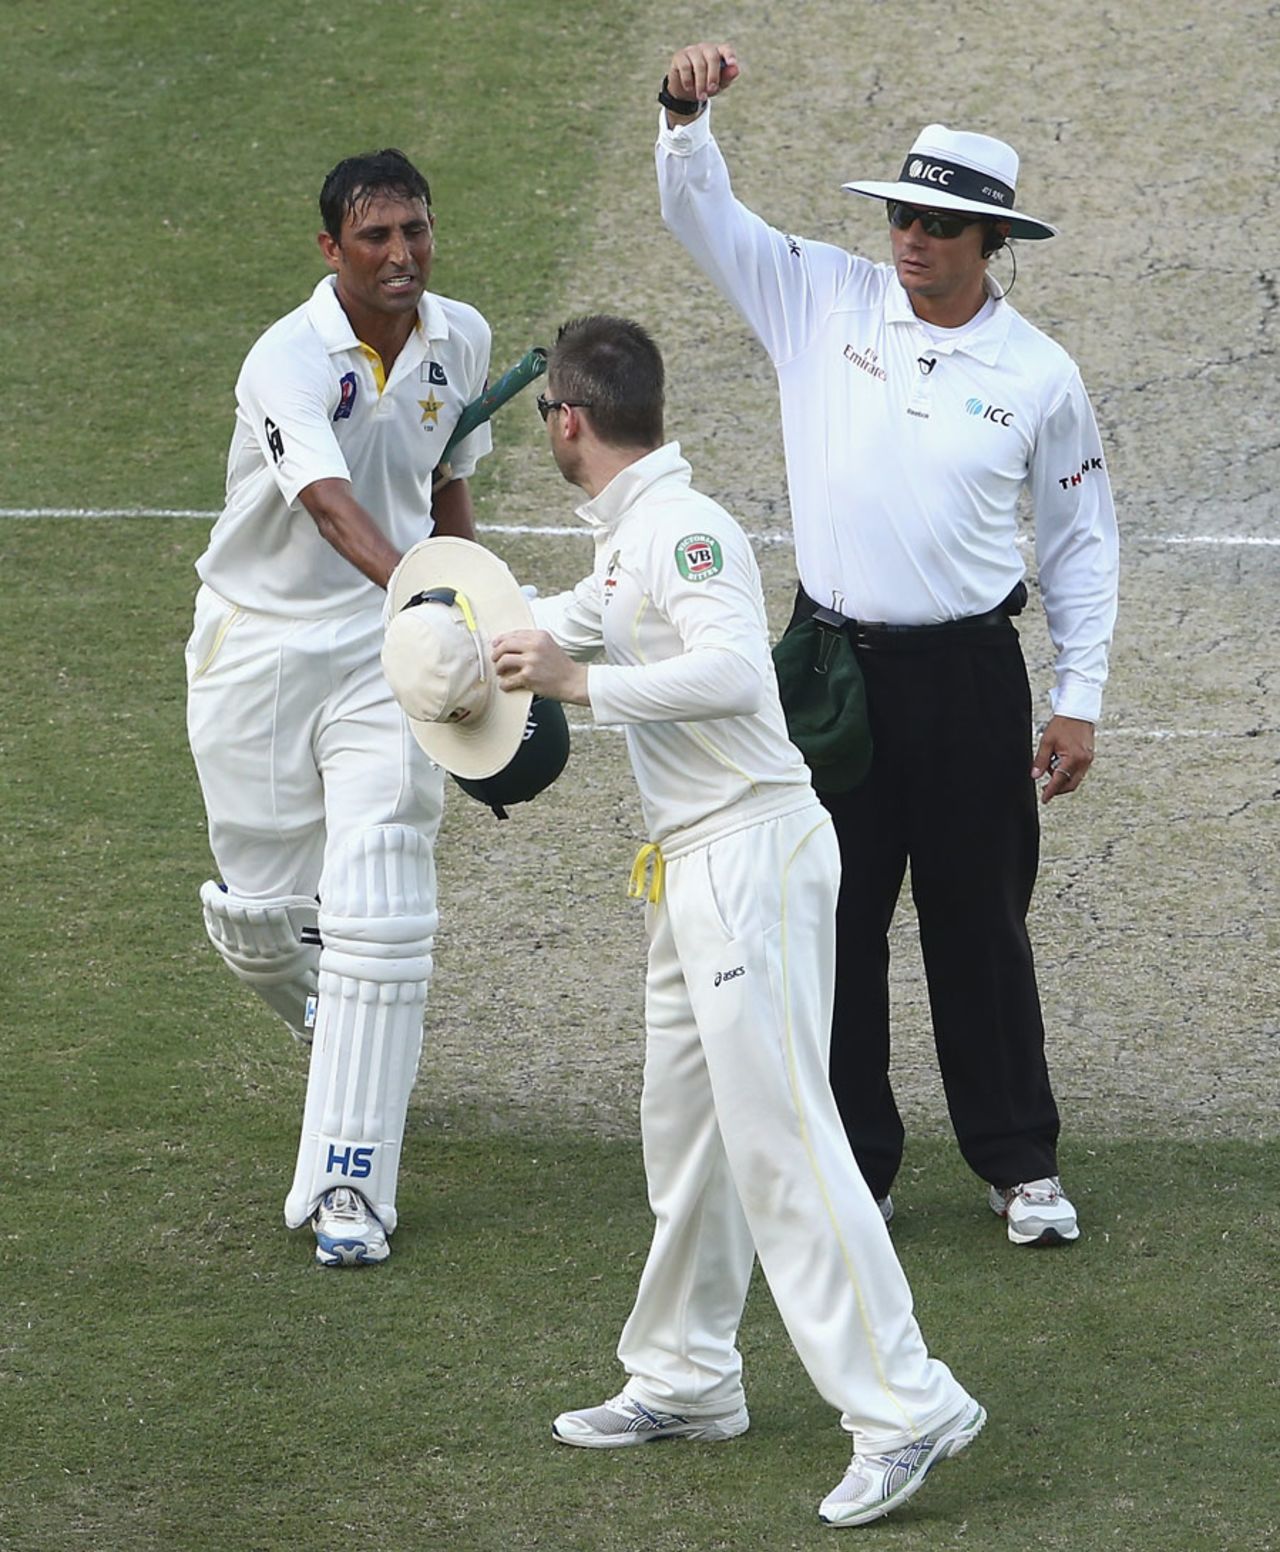 Younis Khan is congratulated by Michael Clarke after recording his second hundred of the Test, Pakistan v Australia, 1st Test, Dubai, 4th day, October 25, 2014